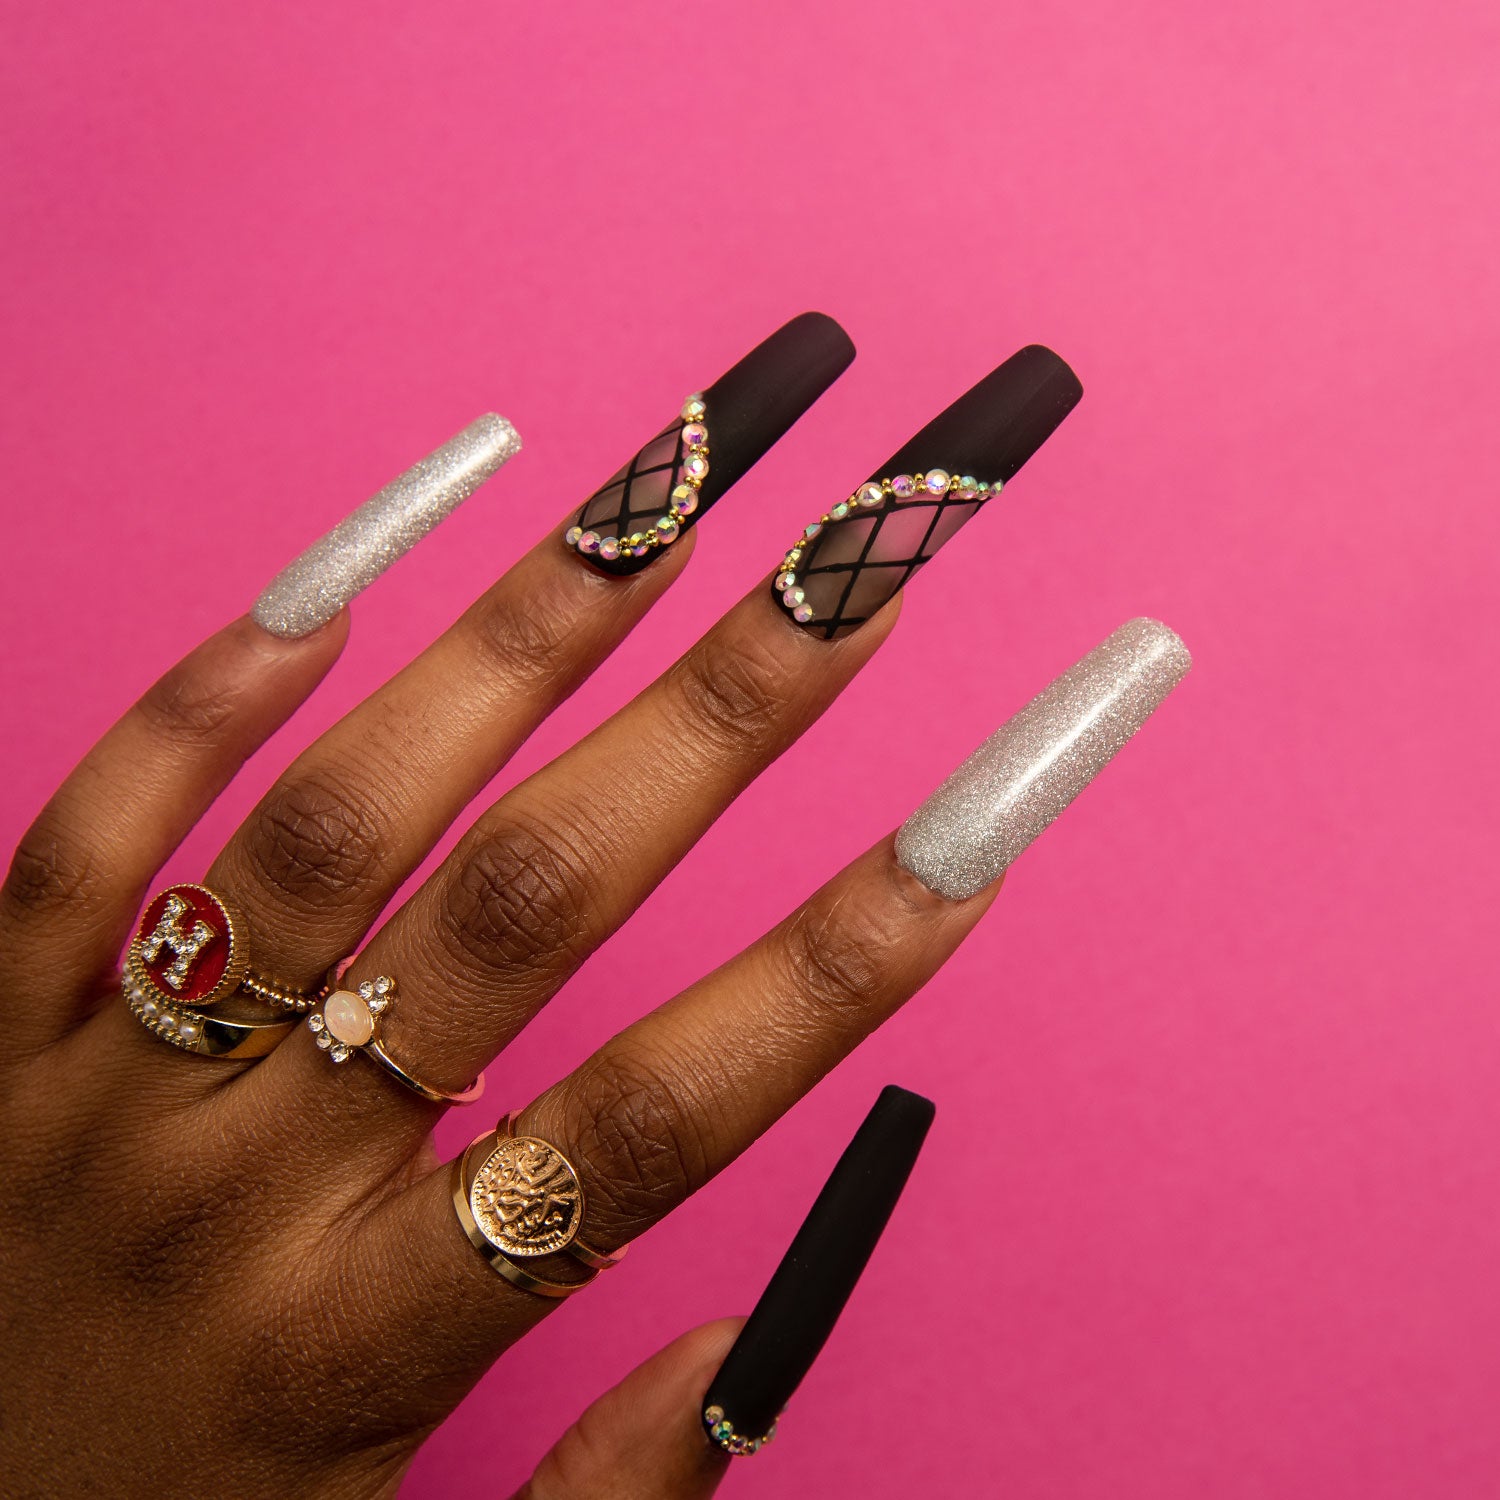 Close-up of a hand with long, square-shaped Black Lace press-on nails. The nails have a black design with silver shimmer and lace decor, accented with small rhinestones. The hand also showcases several rings, set against a pink background.